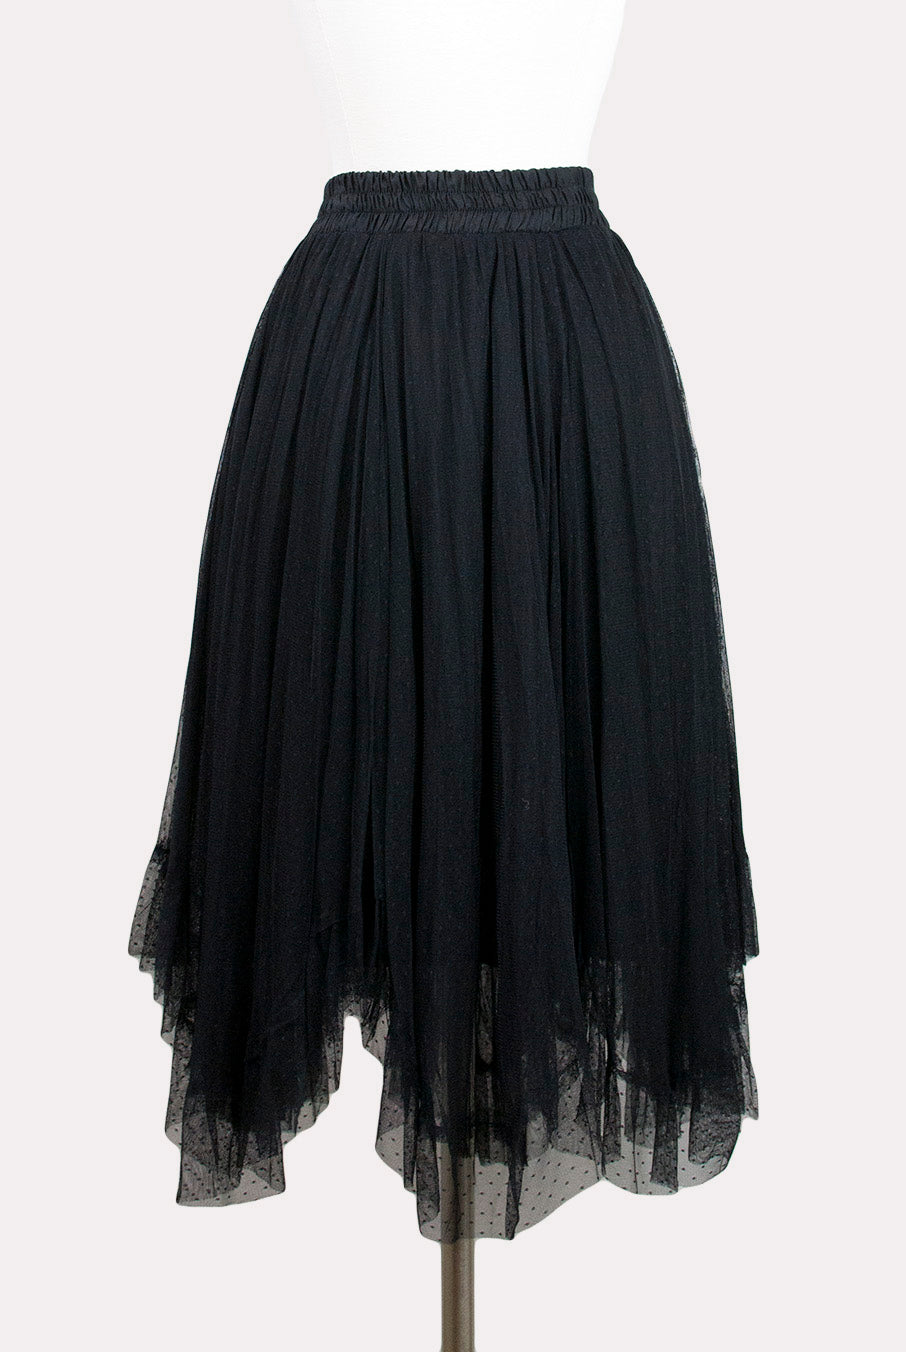 Black Tulle Pindot Skirt by Melody - Hourglass Boutique